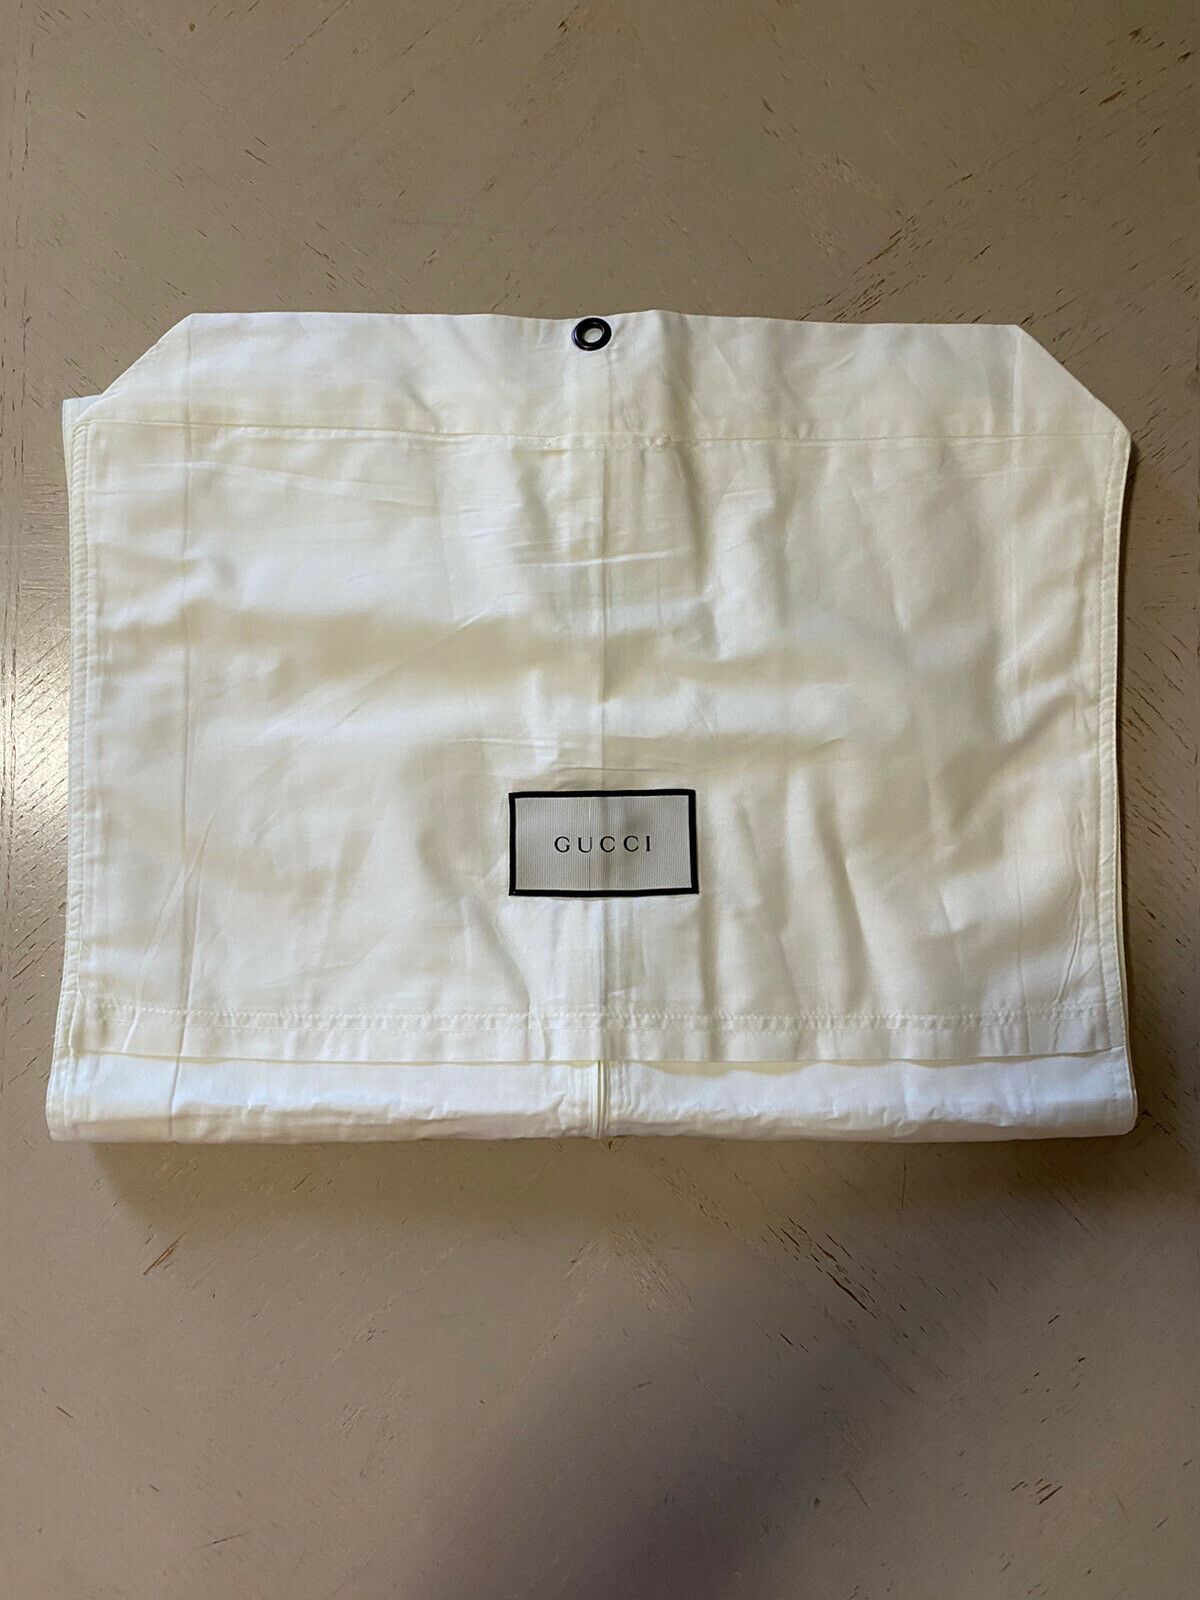 Brand New Gucci Garment Suit,  Any Clothing Unisex White  Bag